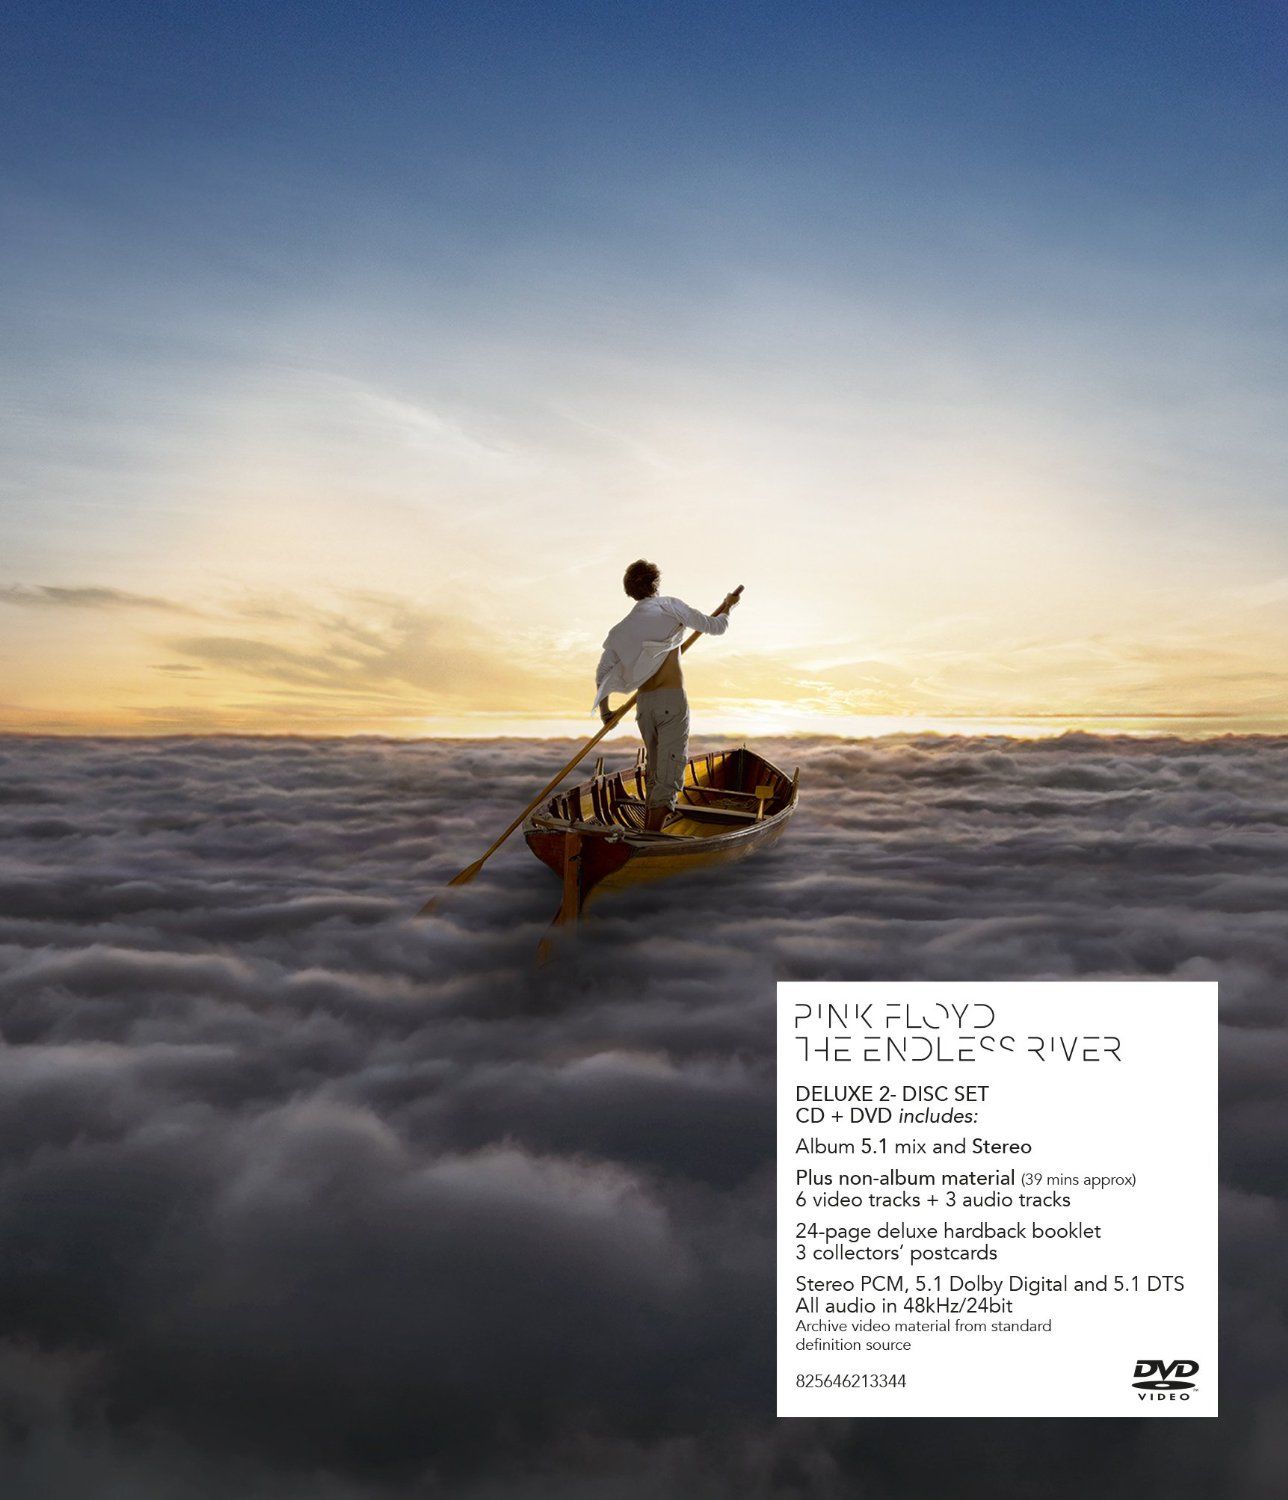 Pink Floyd - Endless River: Deluxe Edition CD + DVD Box Set